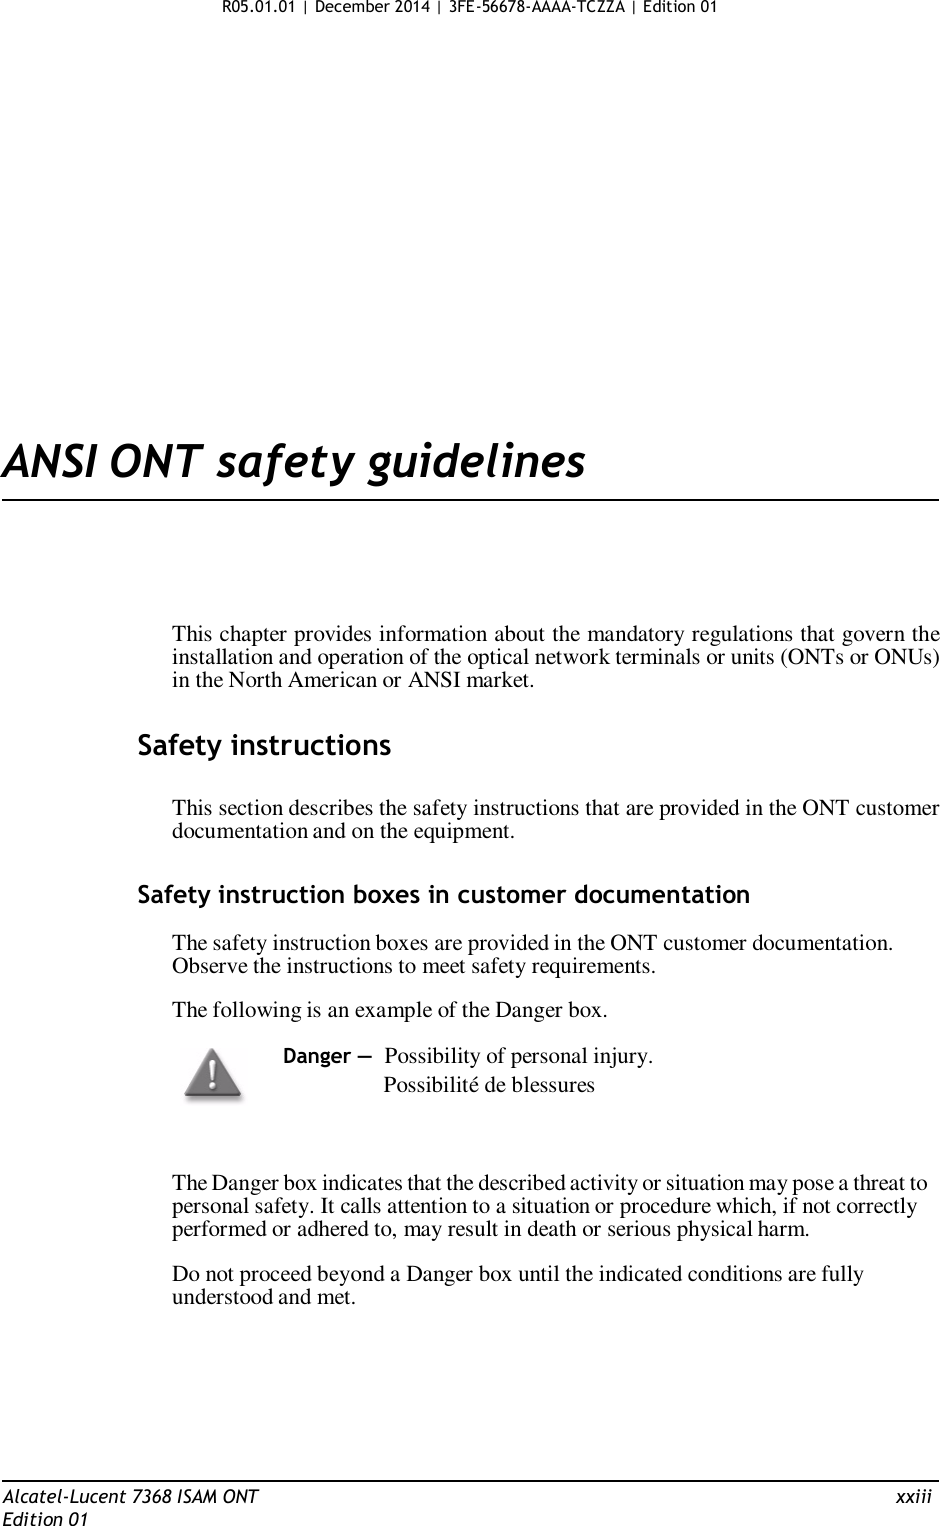 R05.01.01 | December 2014 | 3FE-56678-AAAA-TCZZA | Edition 01                      ANSI ONT safety guidelines       This chapter provides information about the mandatory regulations that govern the installation and operation of the optical network terminals or units (ONTs or ONUs) in the North American or ANSI market.   Safety instructions   This section describes the safety instructions that are provided in the ONT customer documentation and on the equipment.   Safety instruction boxes in customer documentation  The safety instruction boxes are provided in the ONT customer documentation. Observe the instructions to meet safety requirements.  The following is an example of the Danger box.  Danger — Possibility of personal injury.                 Possibilité de blessures    The Danger box indicates that the described activity or situation may pose a threat to personal safety. It calls attention to a situation or procedure which, if not correctly performed or adhered to, may result in death or serious physical harm.  Do not proceed beyond a Danger box until the indicated conditions are fully understood and met.         Alcatel-Lucent 7368 ISAM ONT  xxiii Edition 01 